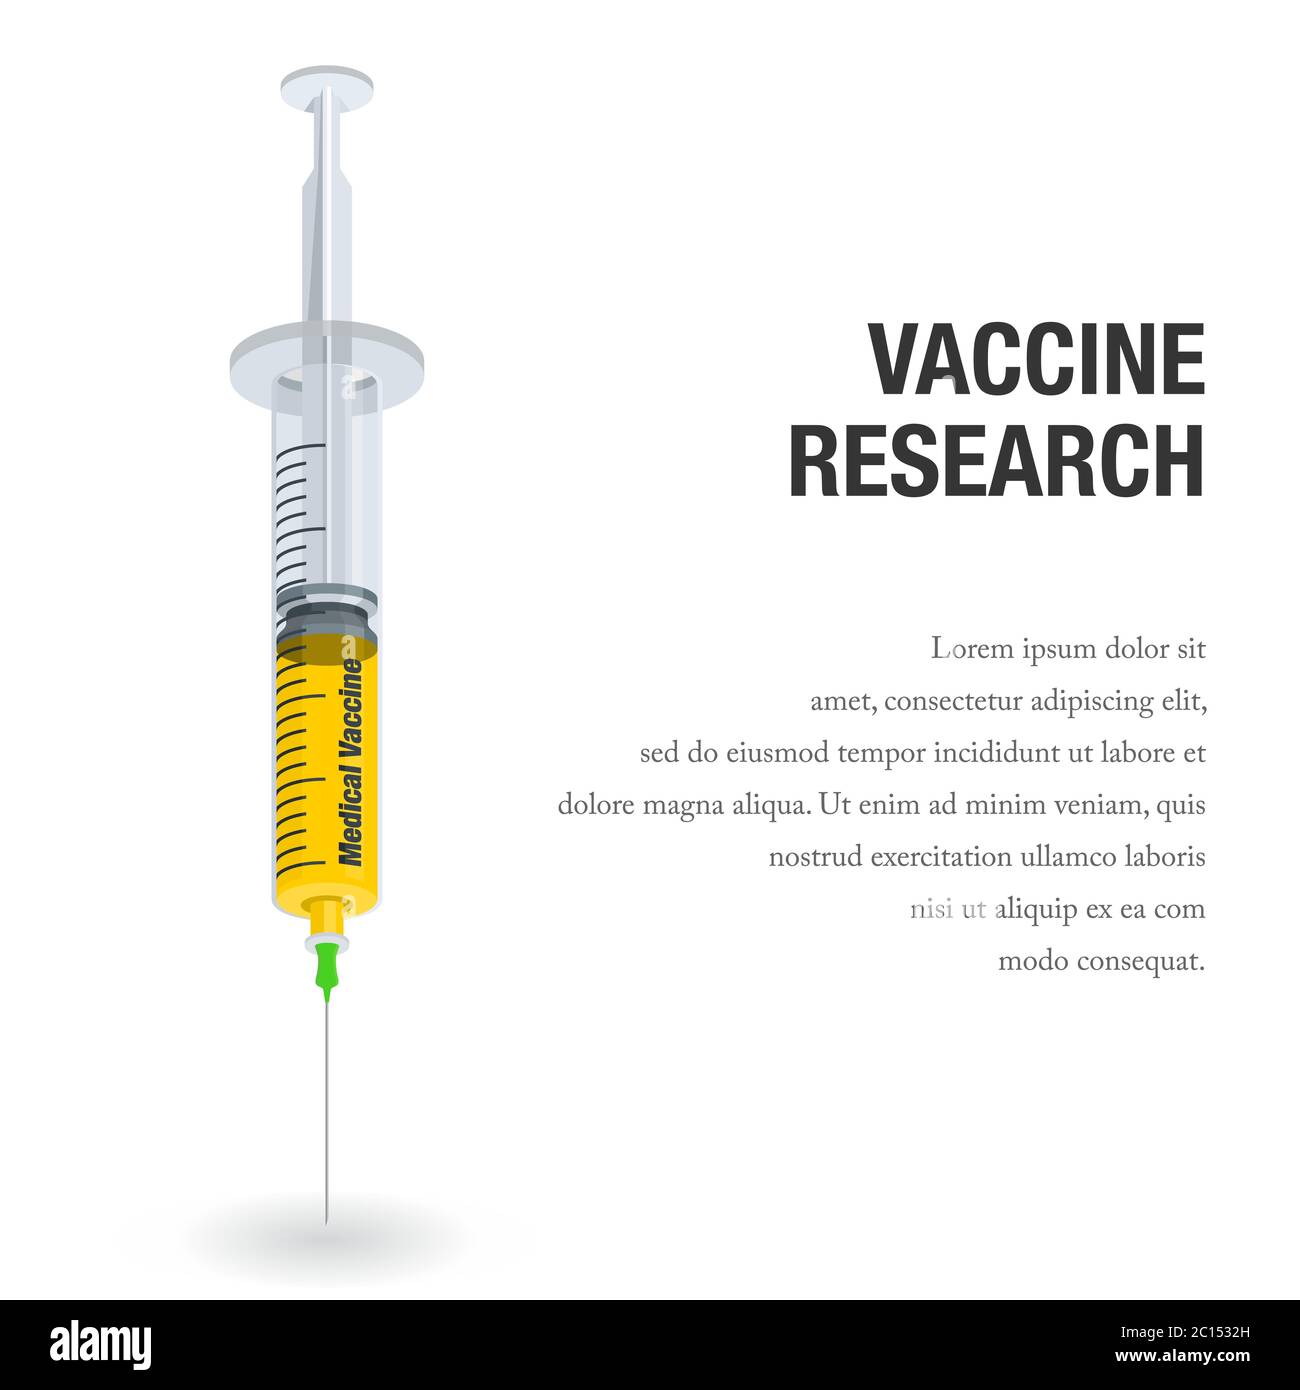 Vector illustration of a syringe containing vaccine fluid. Suitable for banner campaign healing virus outbreaks and research infectious disease virus. Stock Vector